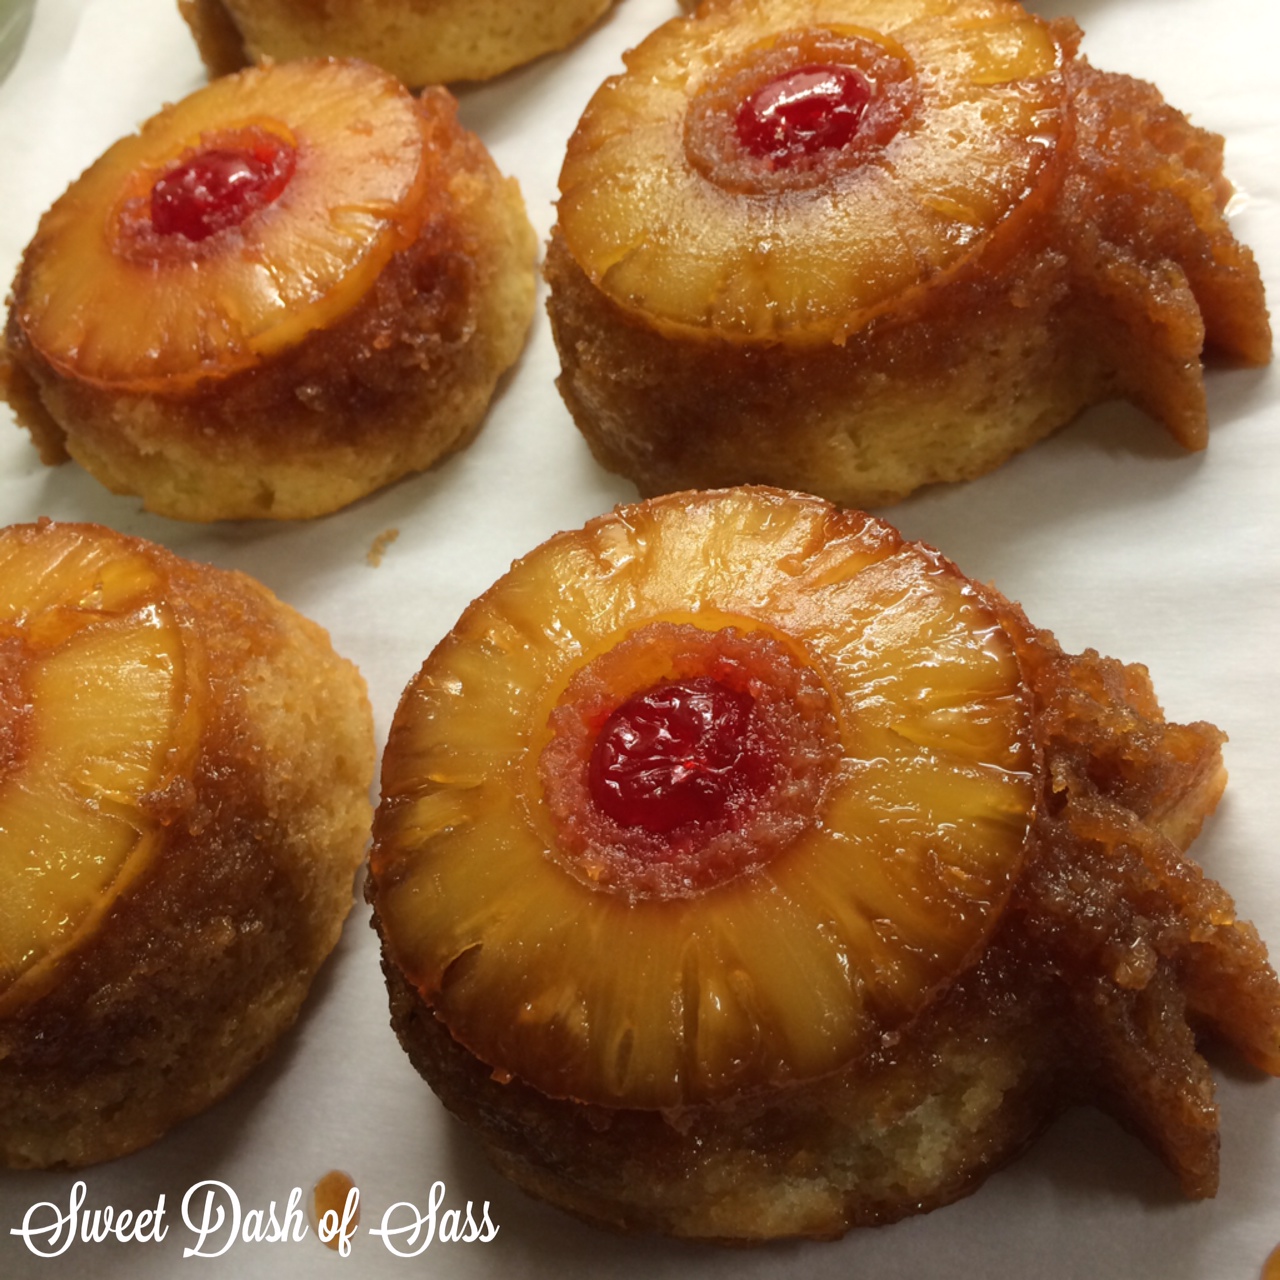 Pineapple Upside Down Cake - www.SweetDashofSass.com -- Also, check out an LIKE Sweet Dash of Sass on Facebook for more recipes/tips!